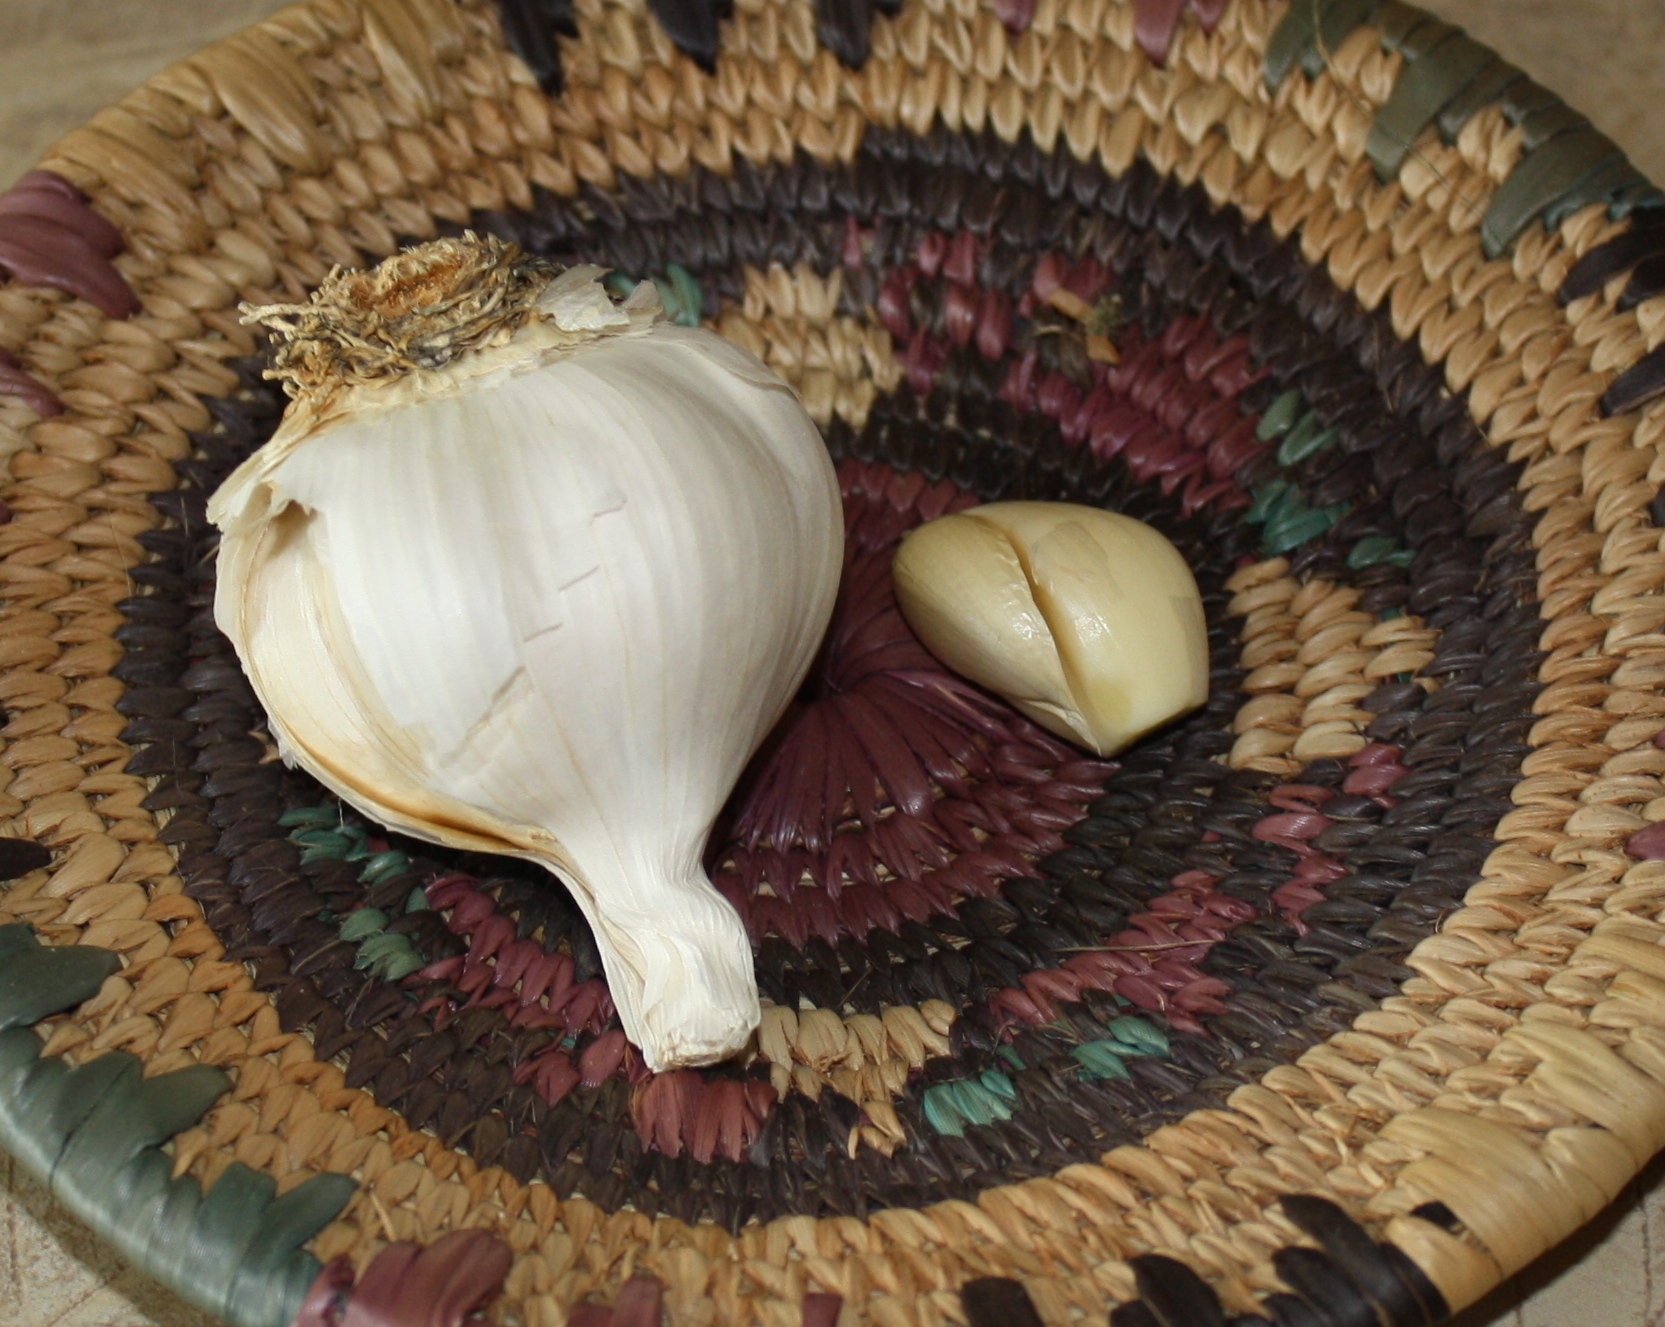 A basket containing a pod and clove of garlic. 4 cloves a day helps normalize cholesterol